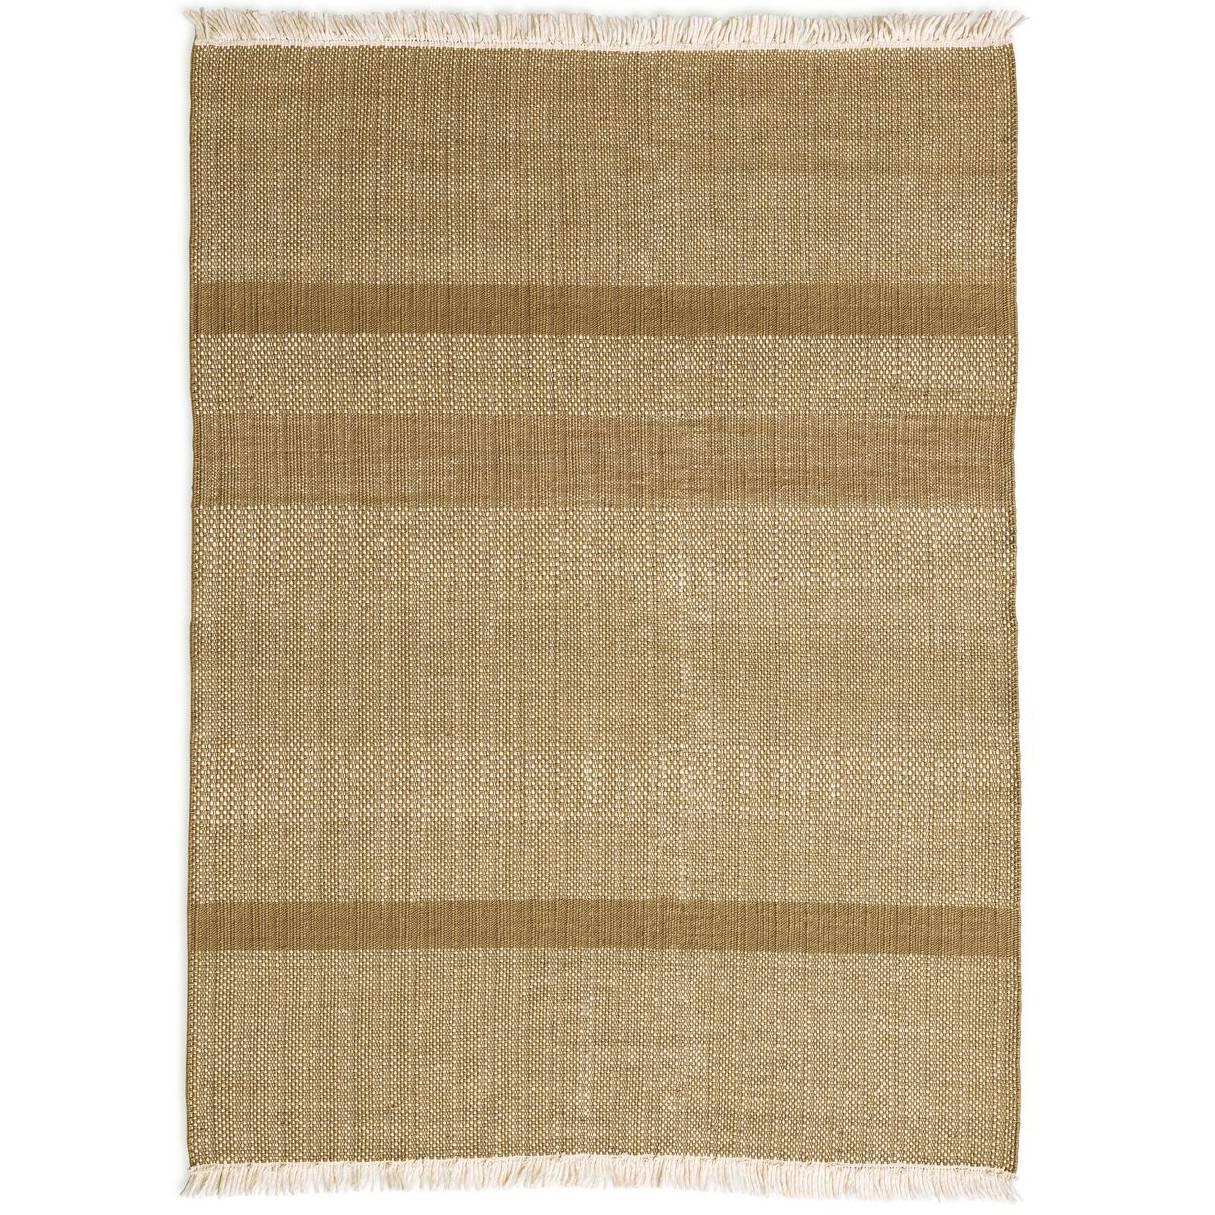 Tres Ochre Hand-Loomed Wool and Felt Texture Rug by Nani Marquina, Small